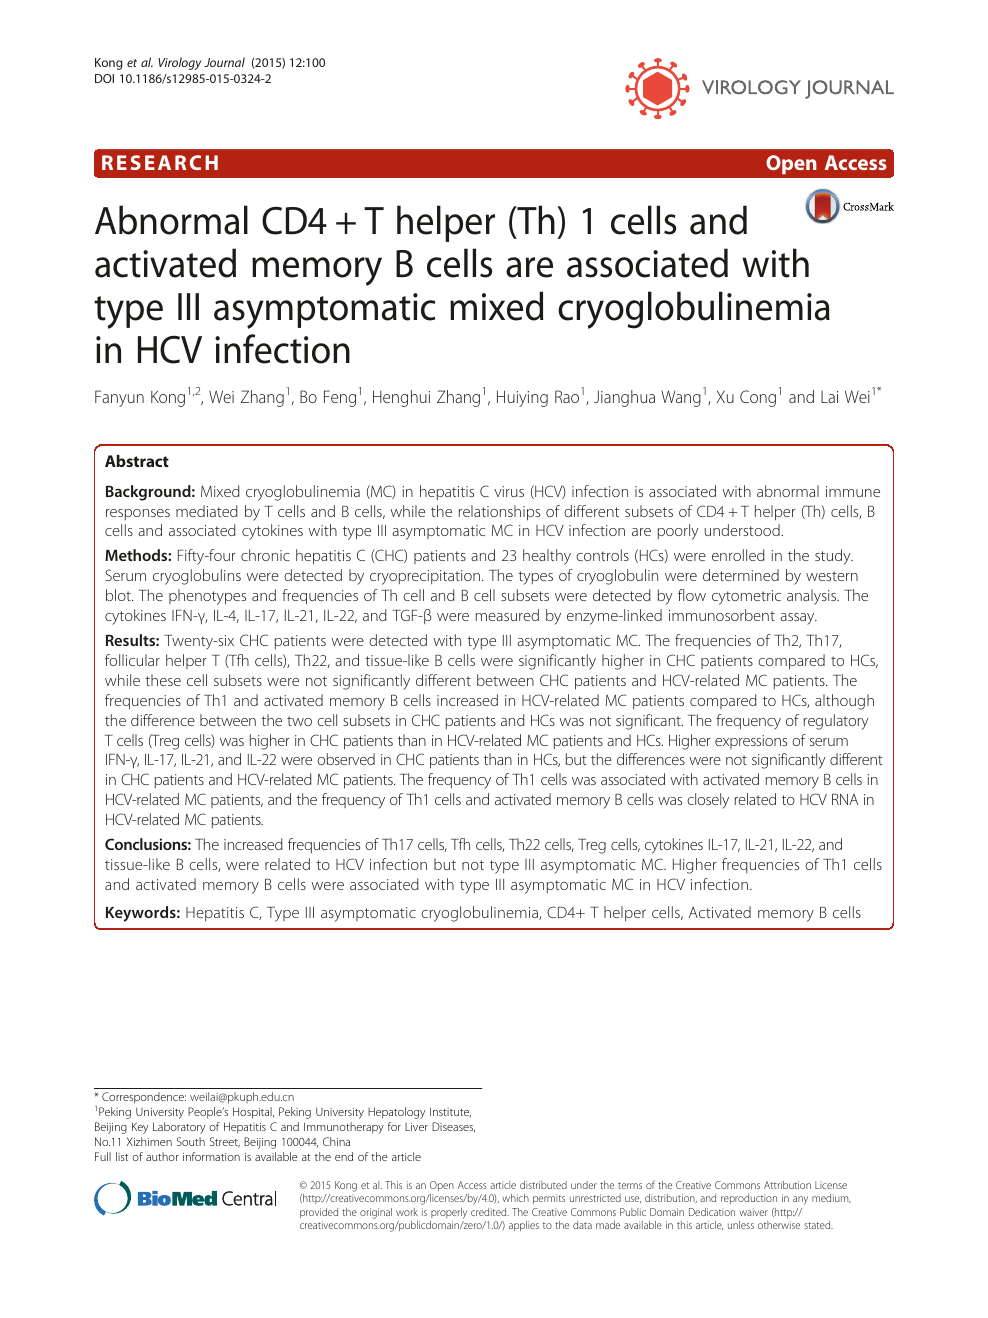 Abnormal Cd4 T Helper Th 1 Cells And Activated Memory B Cells Are Associated With Type Iii Asymptomatic Mixed Cryoglobulinemia In Hcv Infection Topic Of Research Paper In Biological Sciences